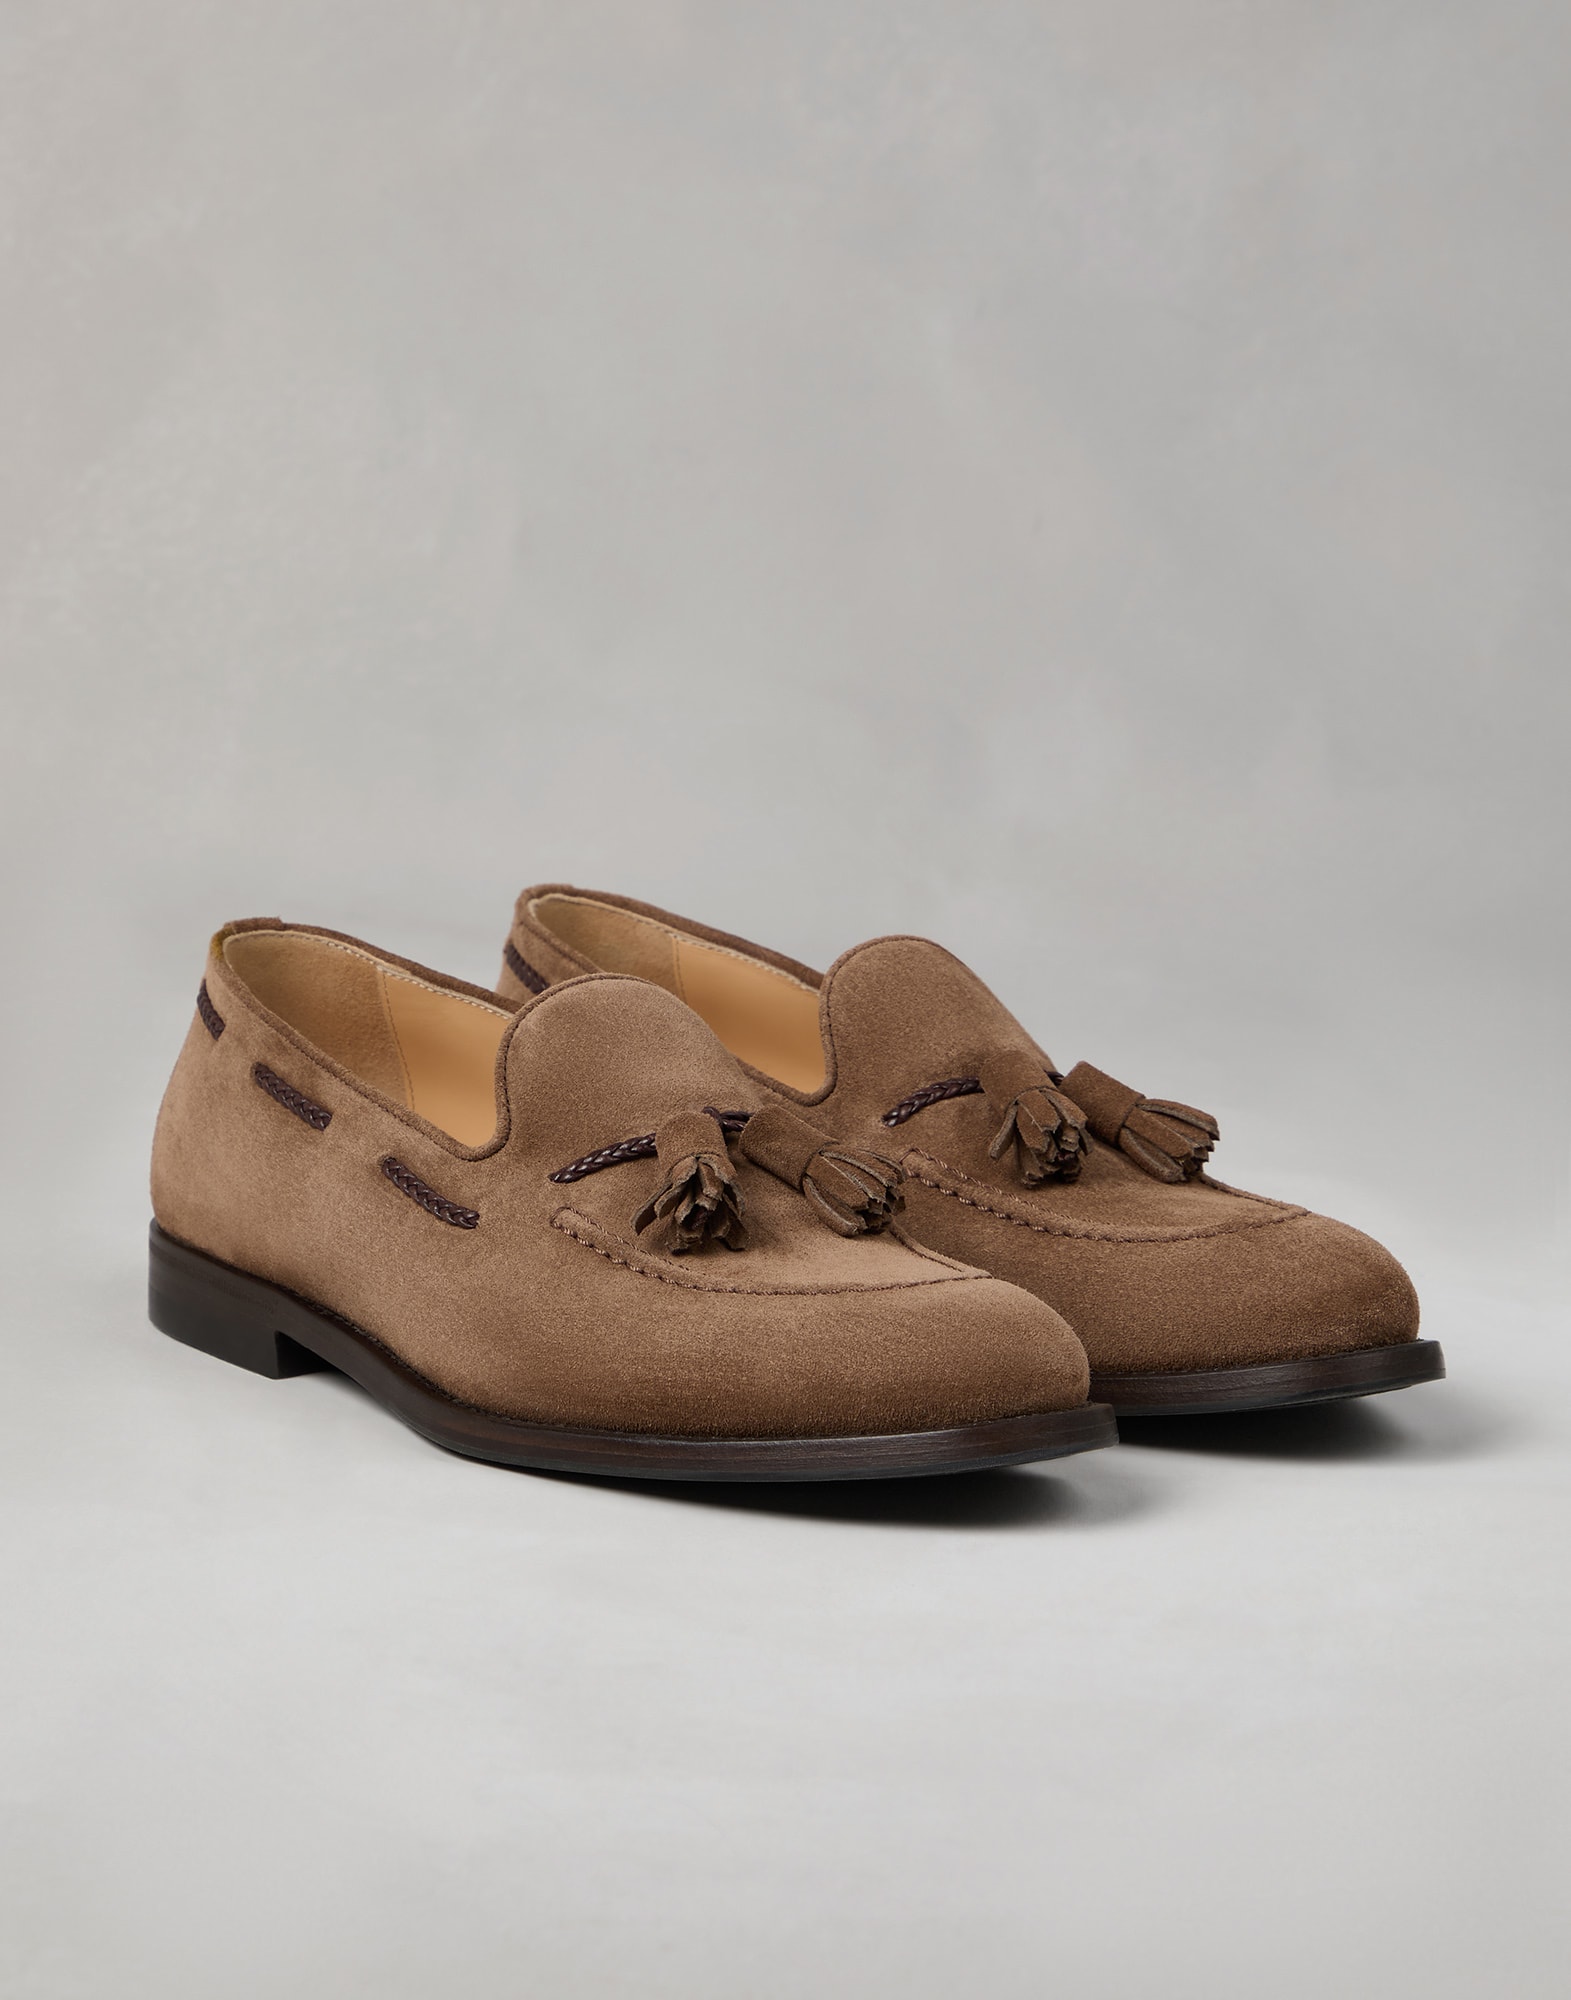 Tassel Loafers - Front view